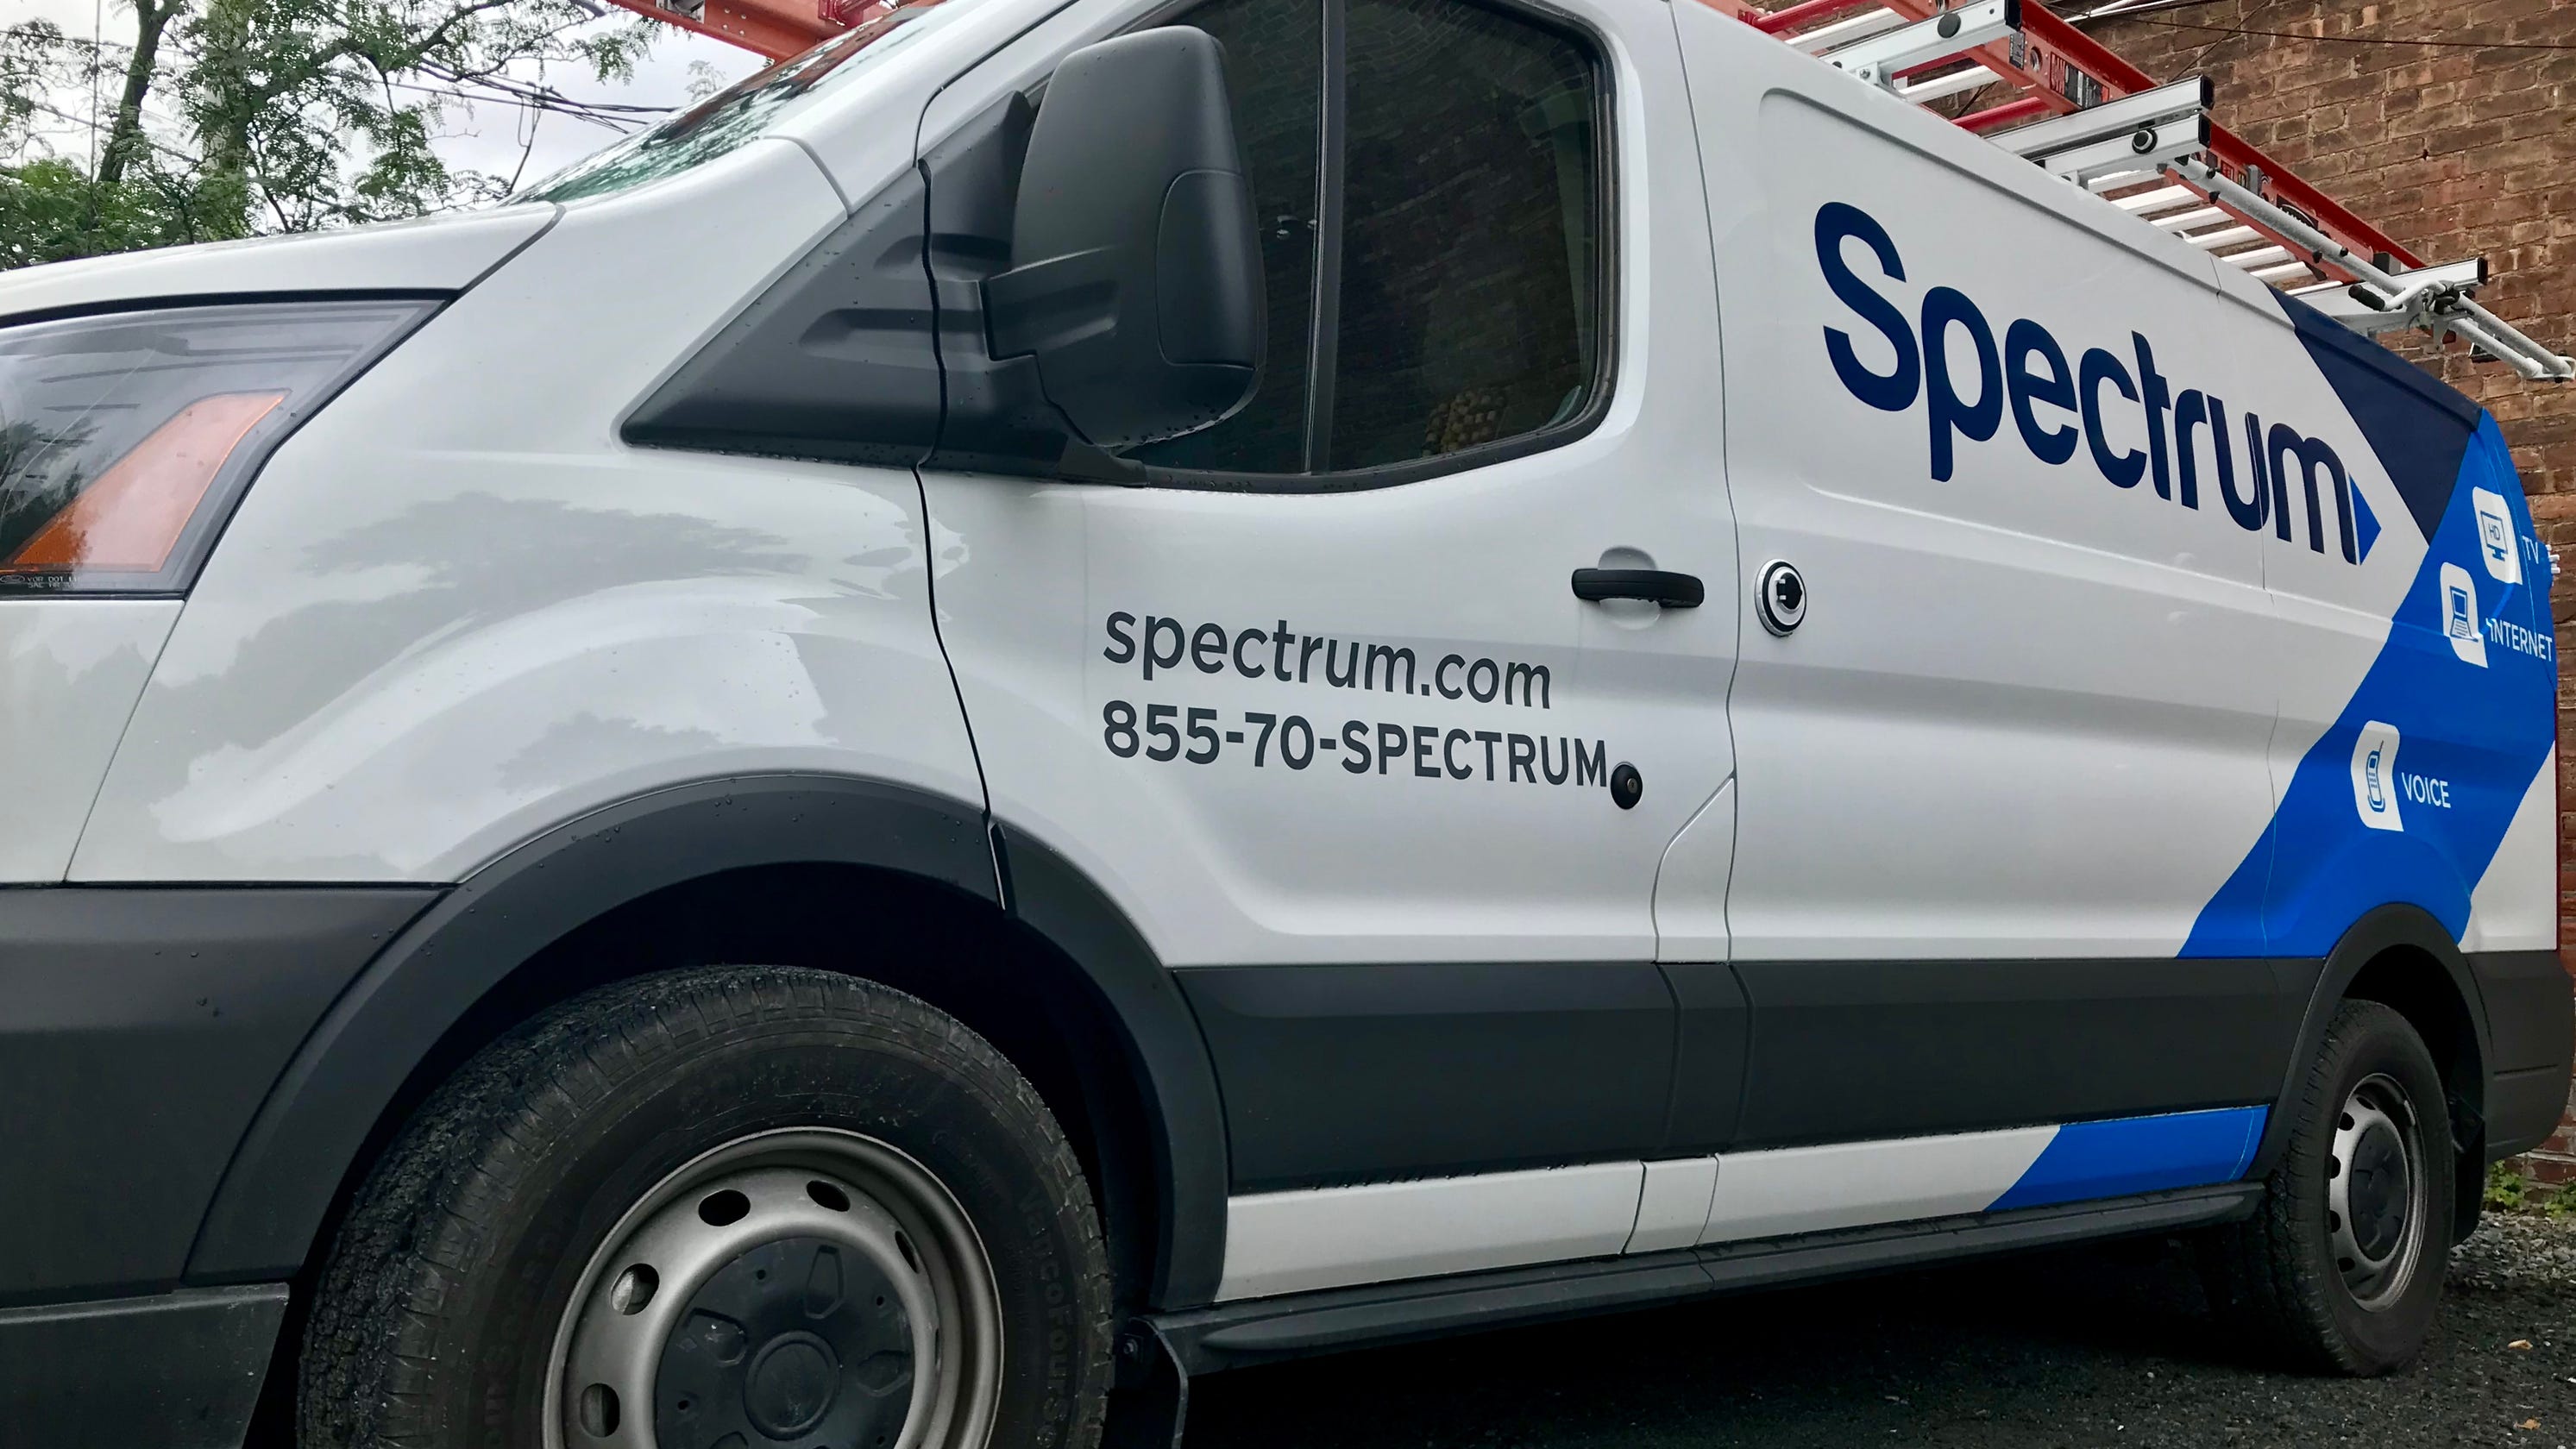 What It Means For Cable Customers Charter Spectrum New York Regulators Reach Settlement